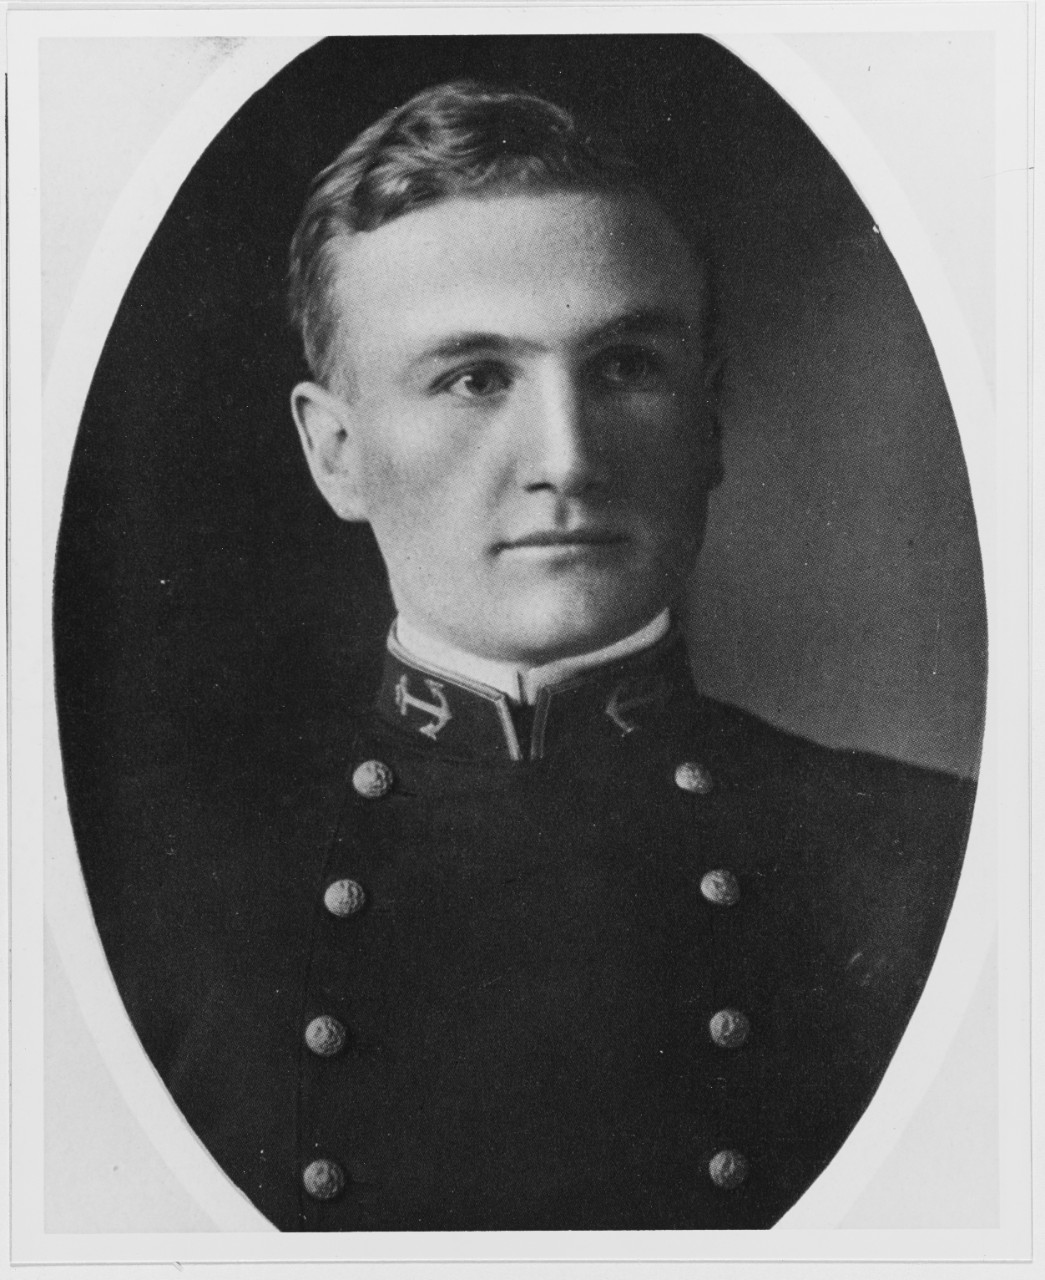 Midshipman Alfred L. Ede, United States Naval Academy